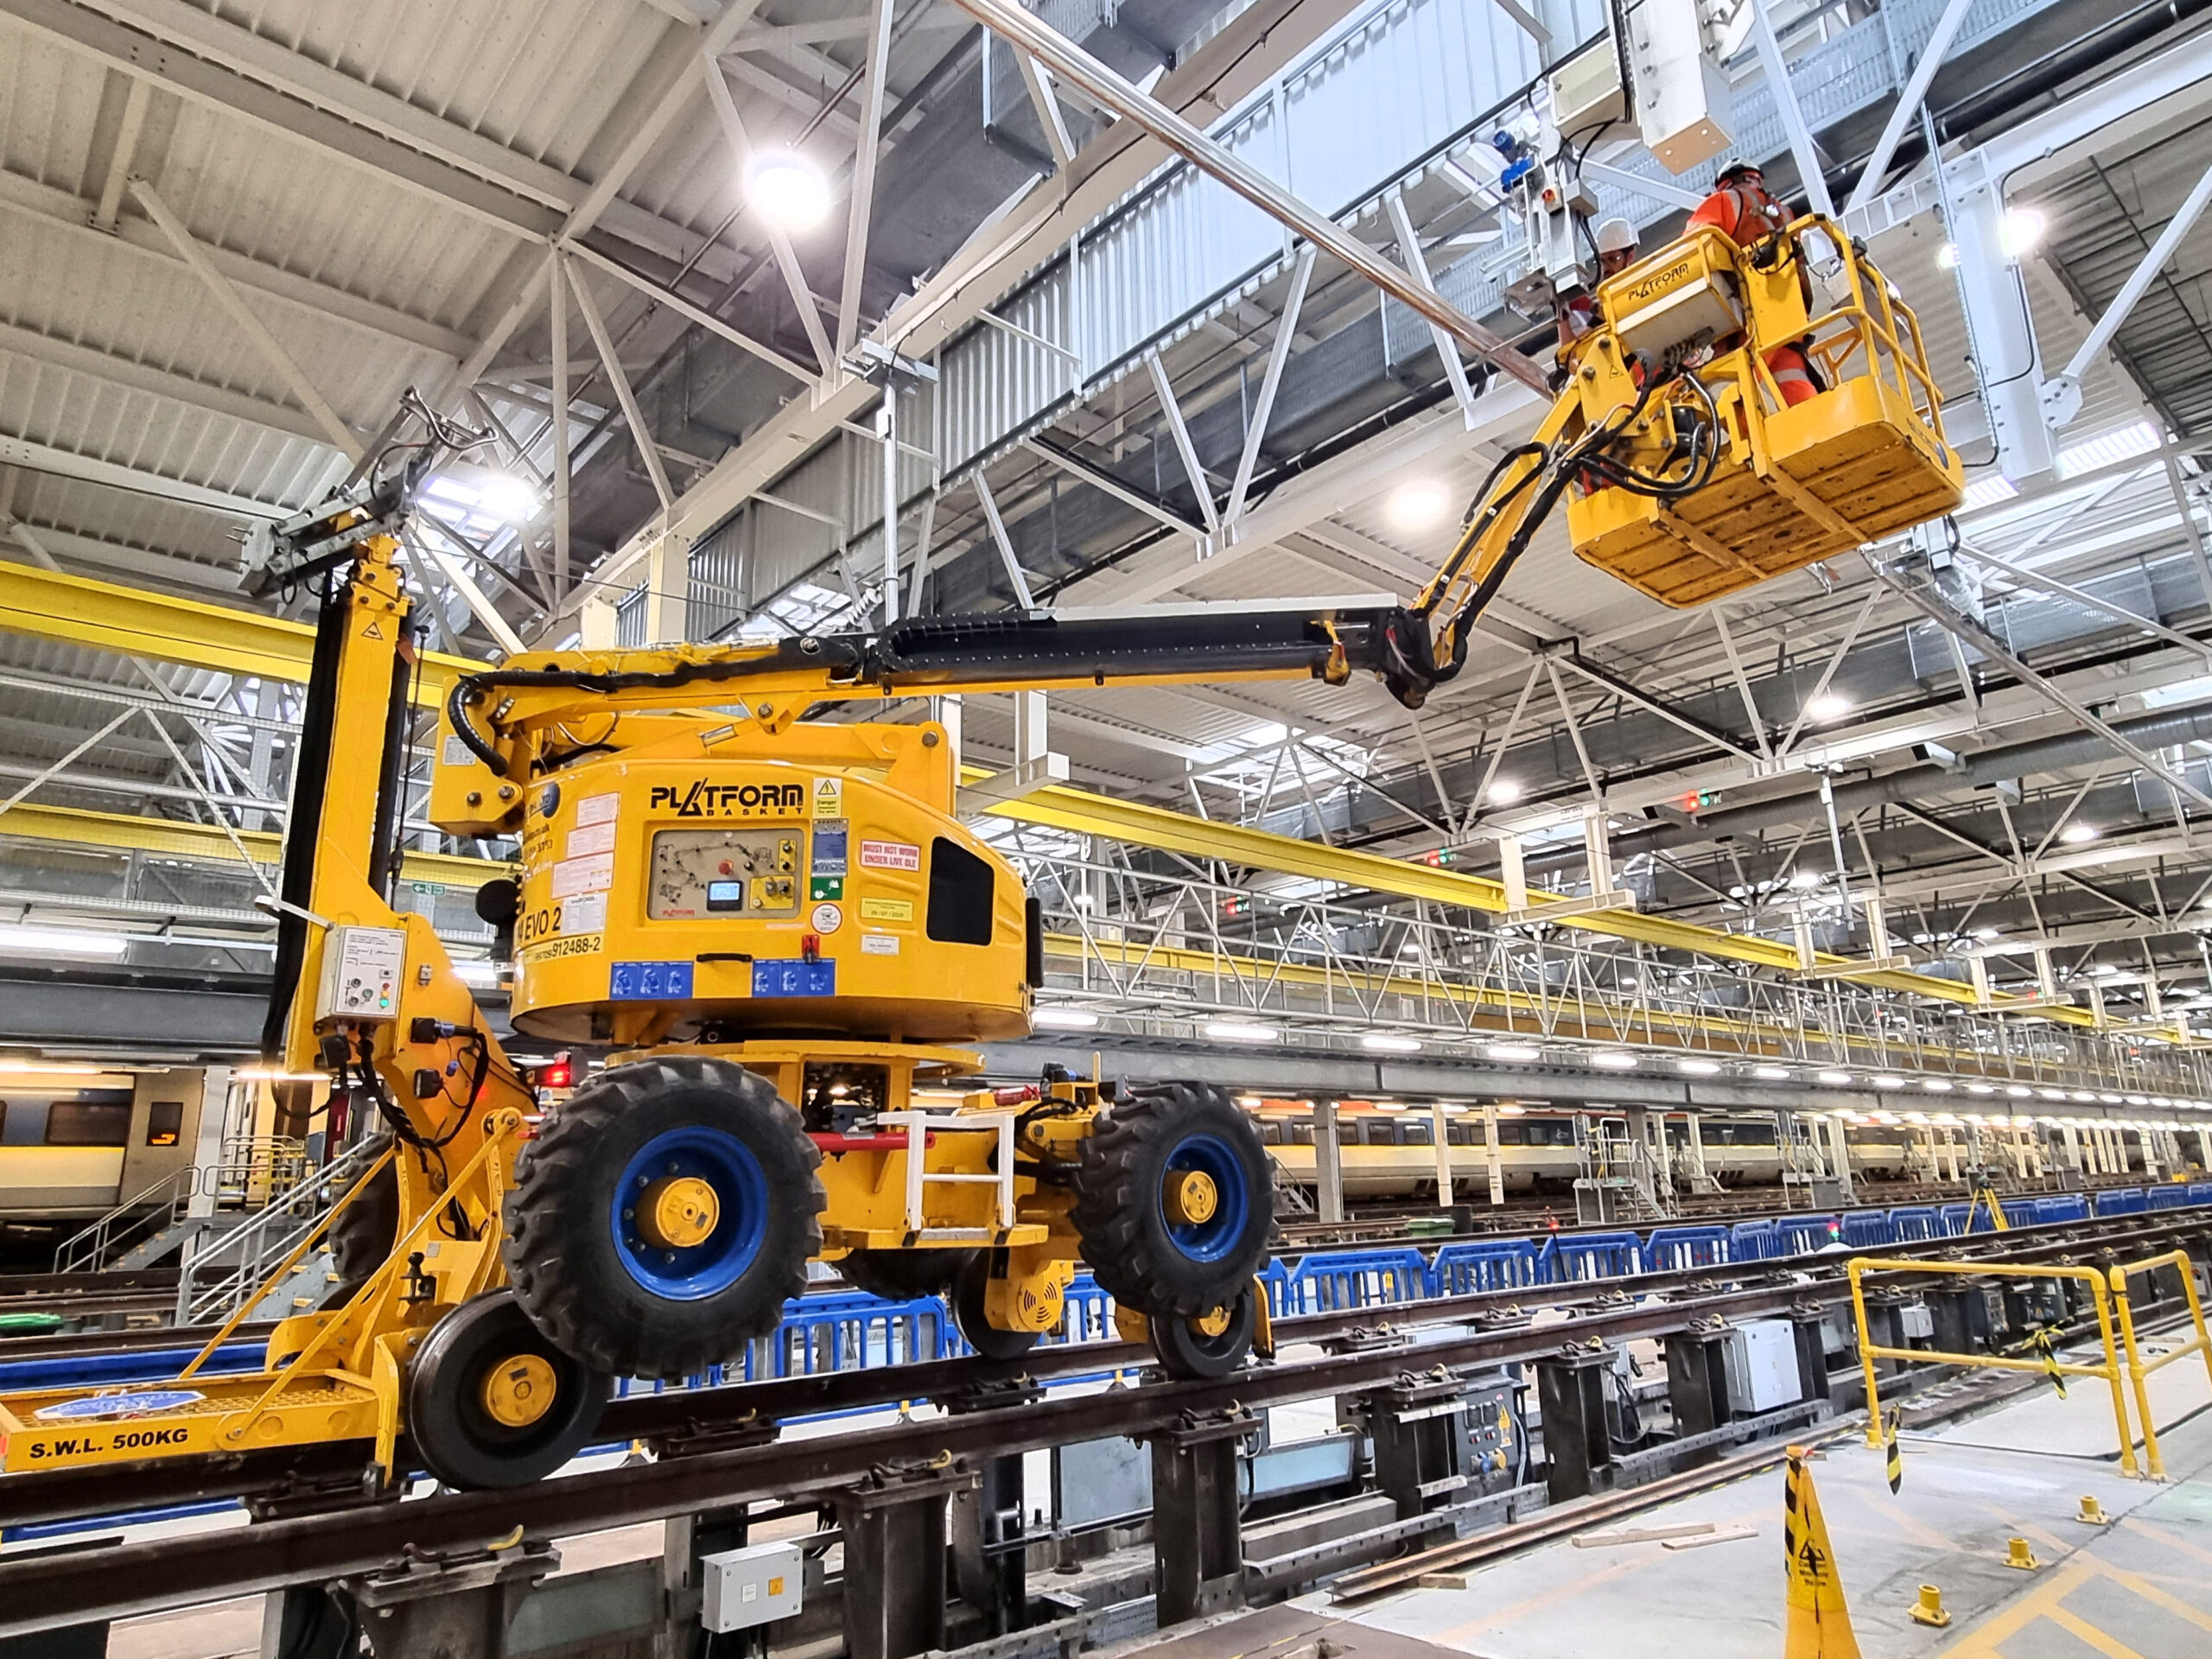 Engineers install moveable electrification equipment at Eurostar depot